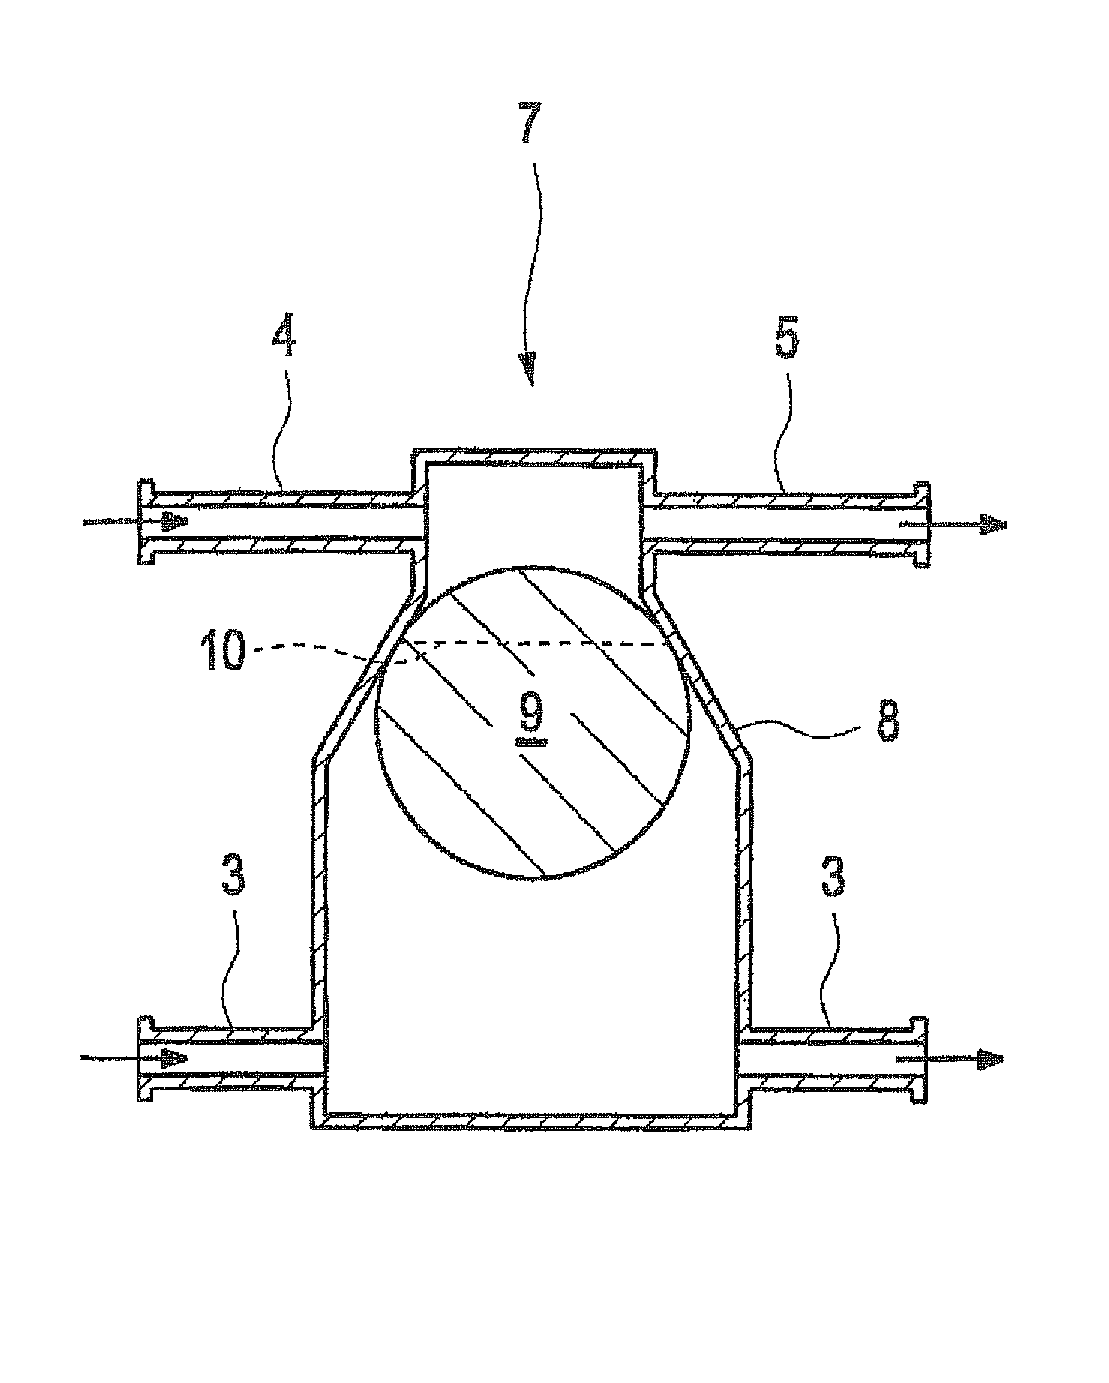 Valve arrangement for venting a coolant circuit of an internal combustion engine